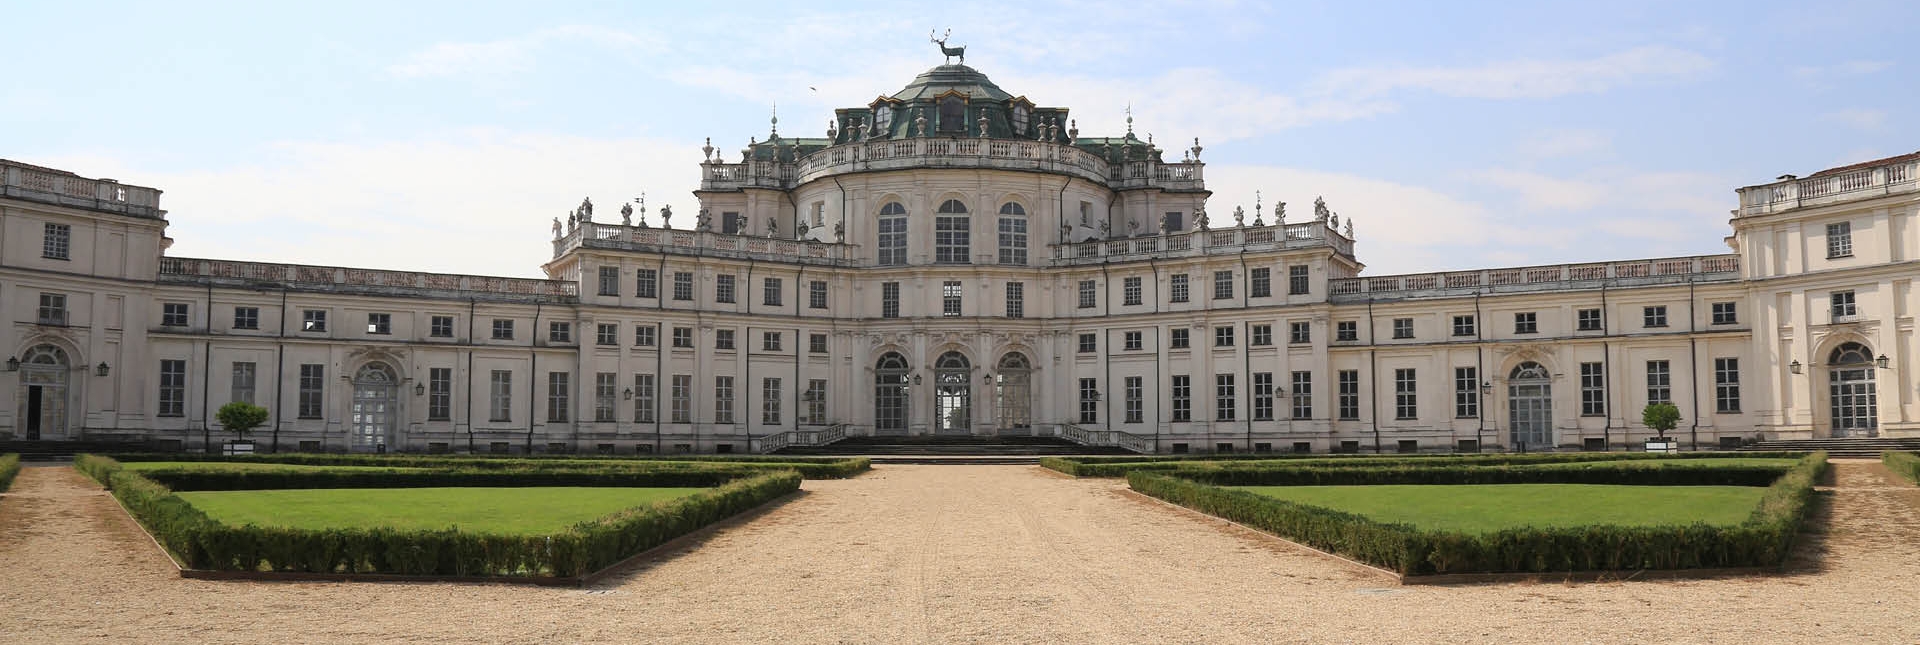 Experience Royalty at La Venaria Reale: Day Trip from Torino